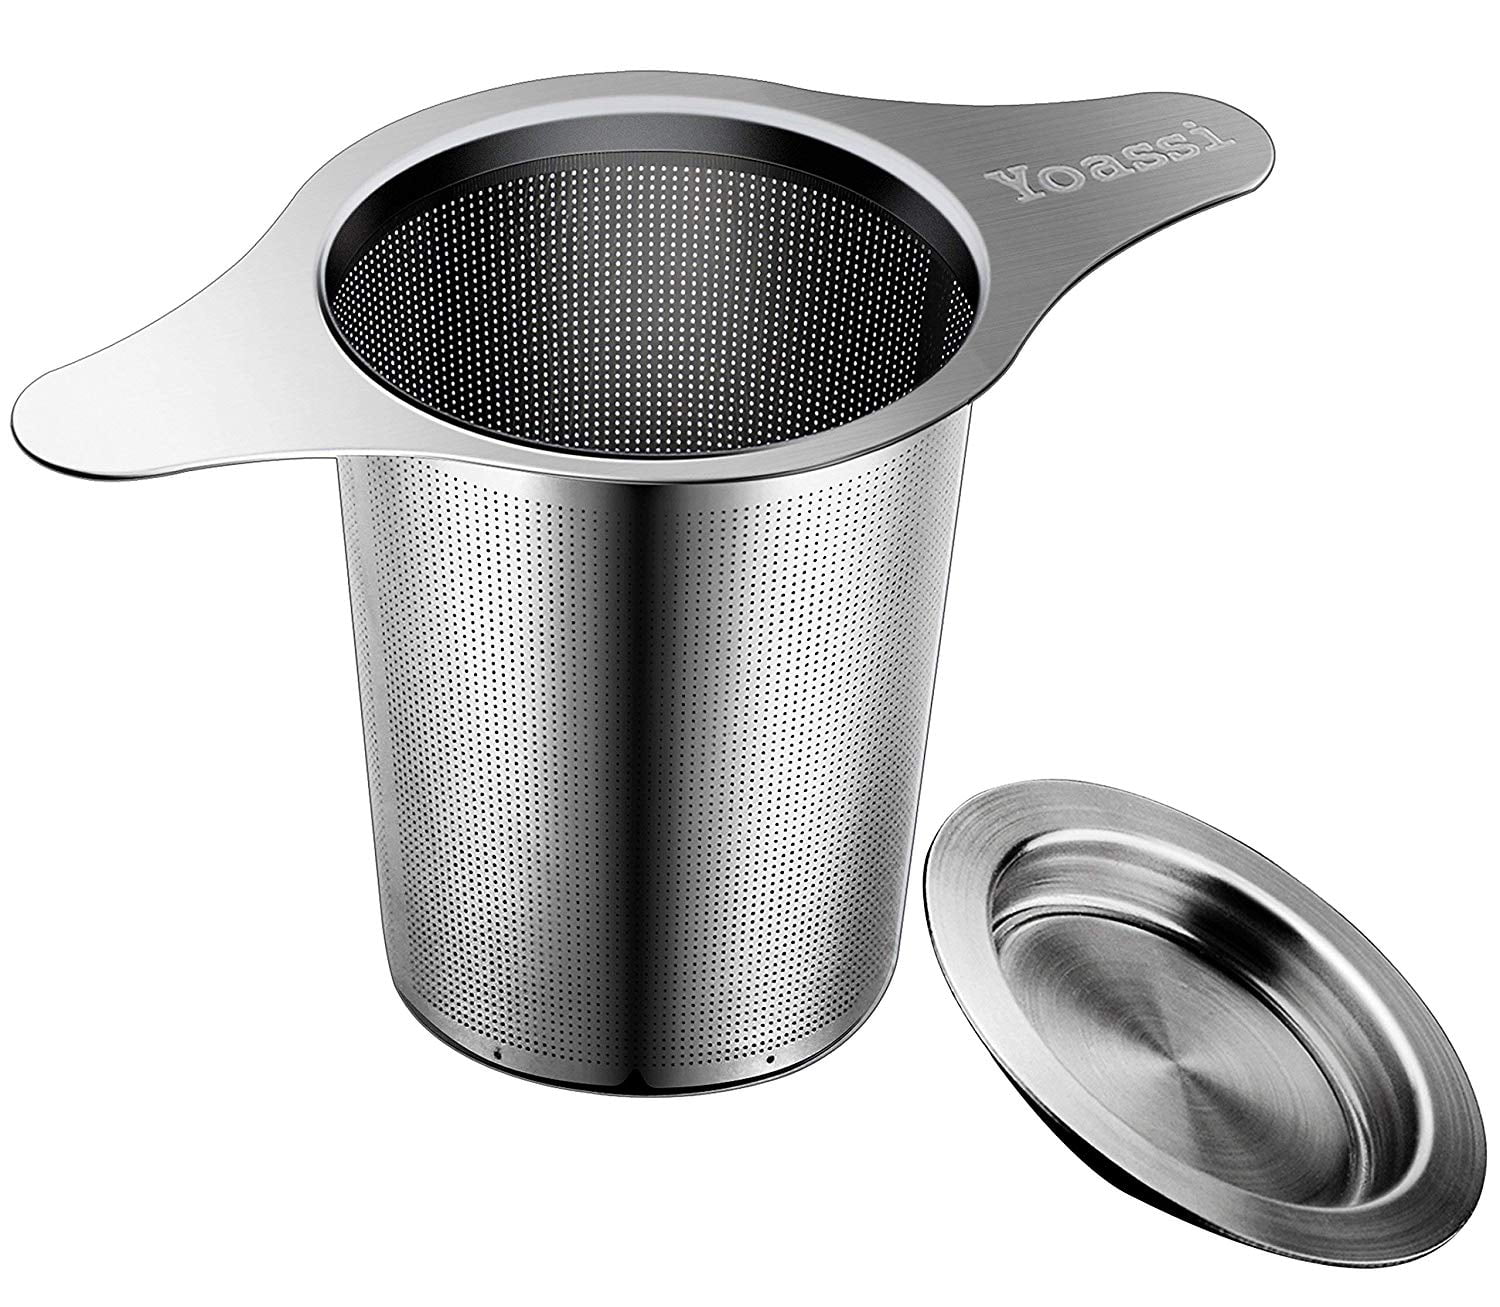 New Stainless Steel Tea Bag Squeezer Infuser Filter Strainer Steep Silver 